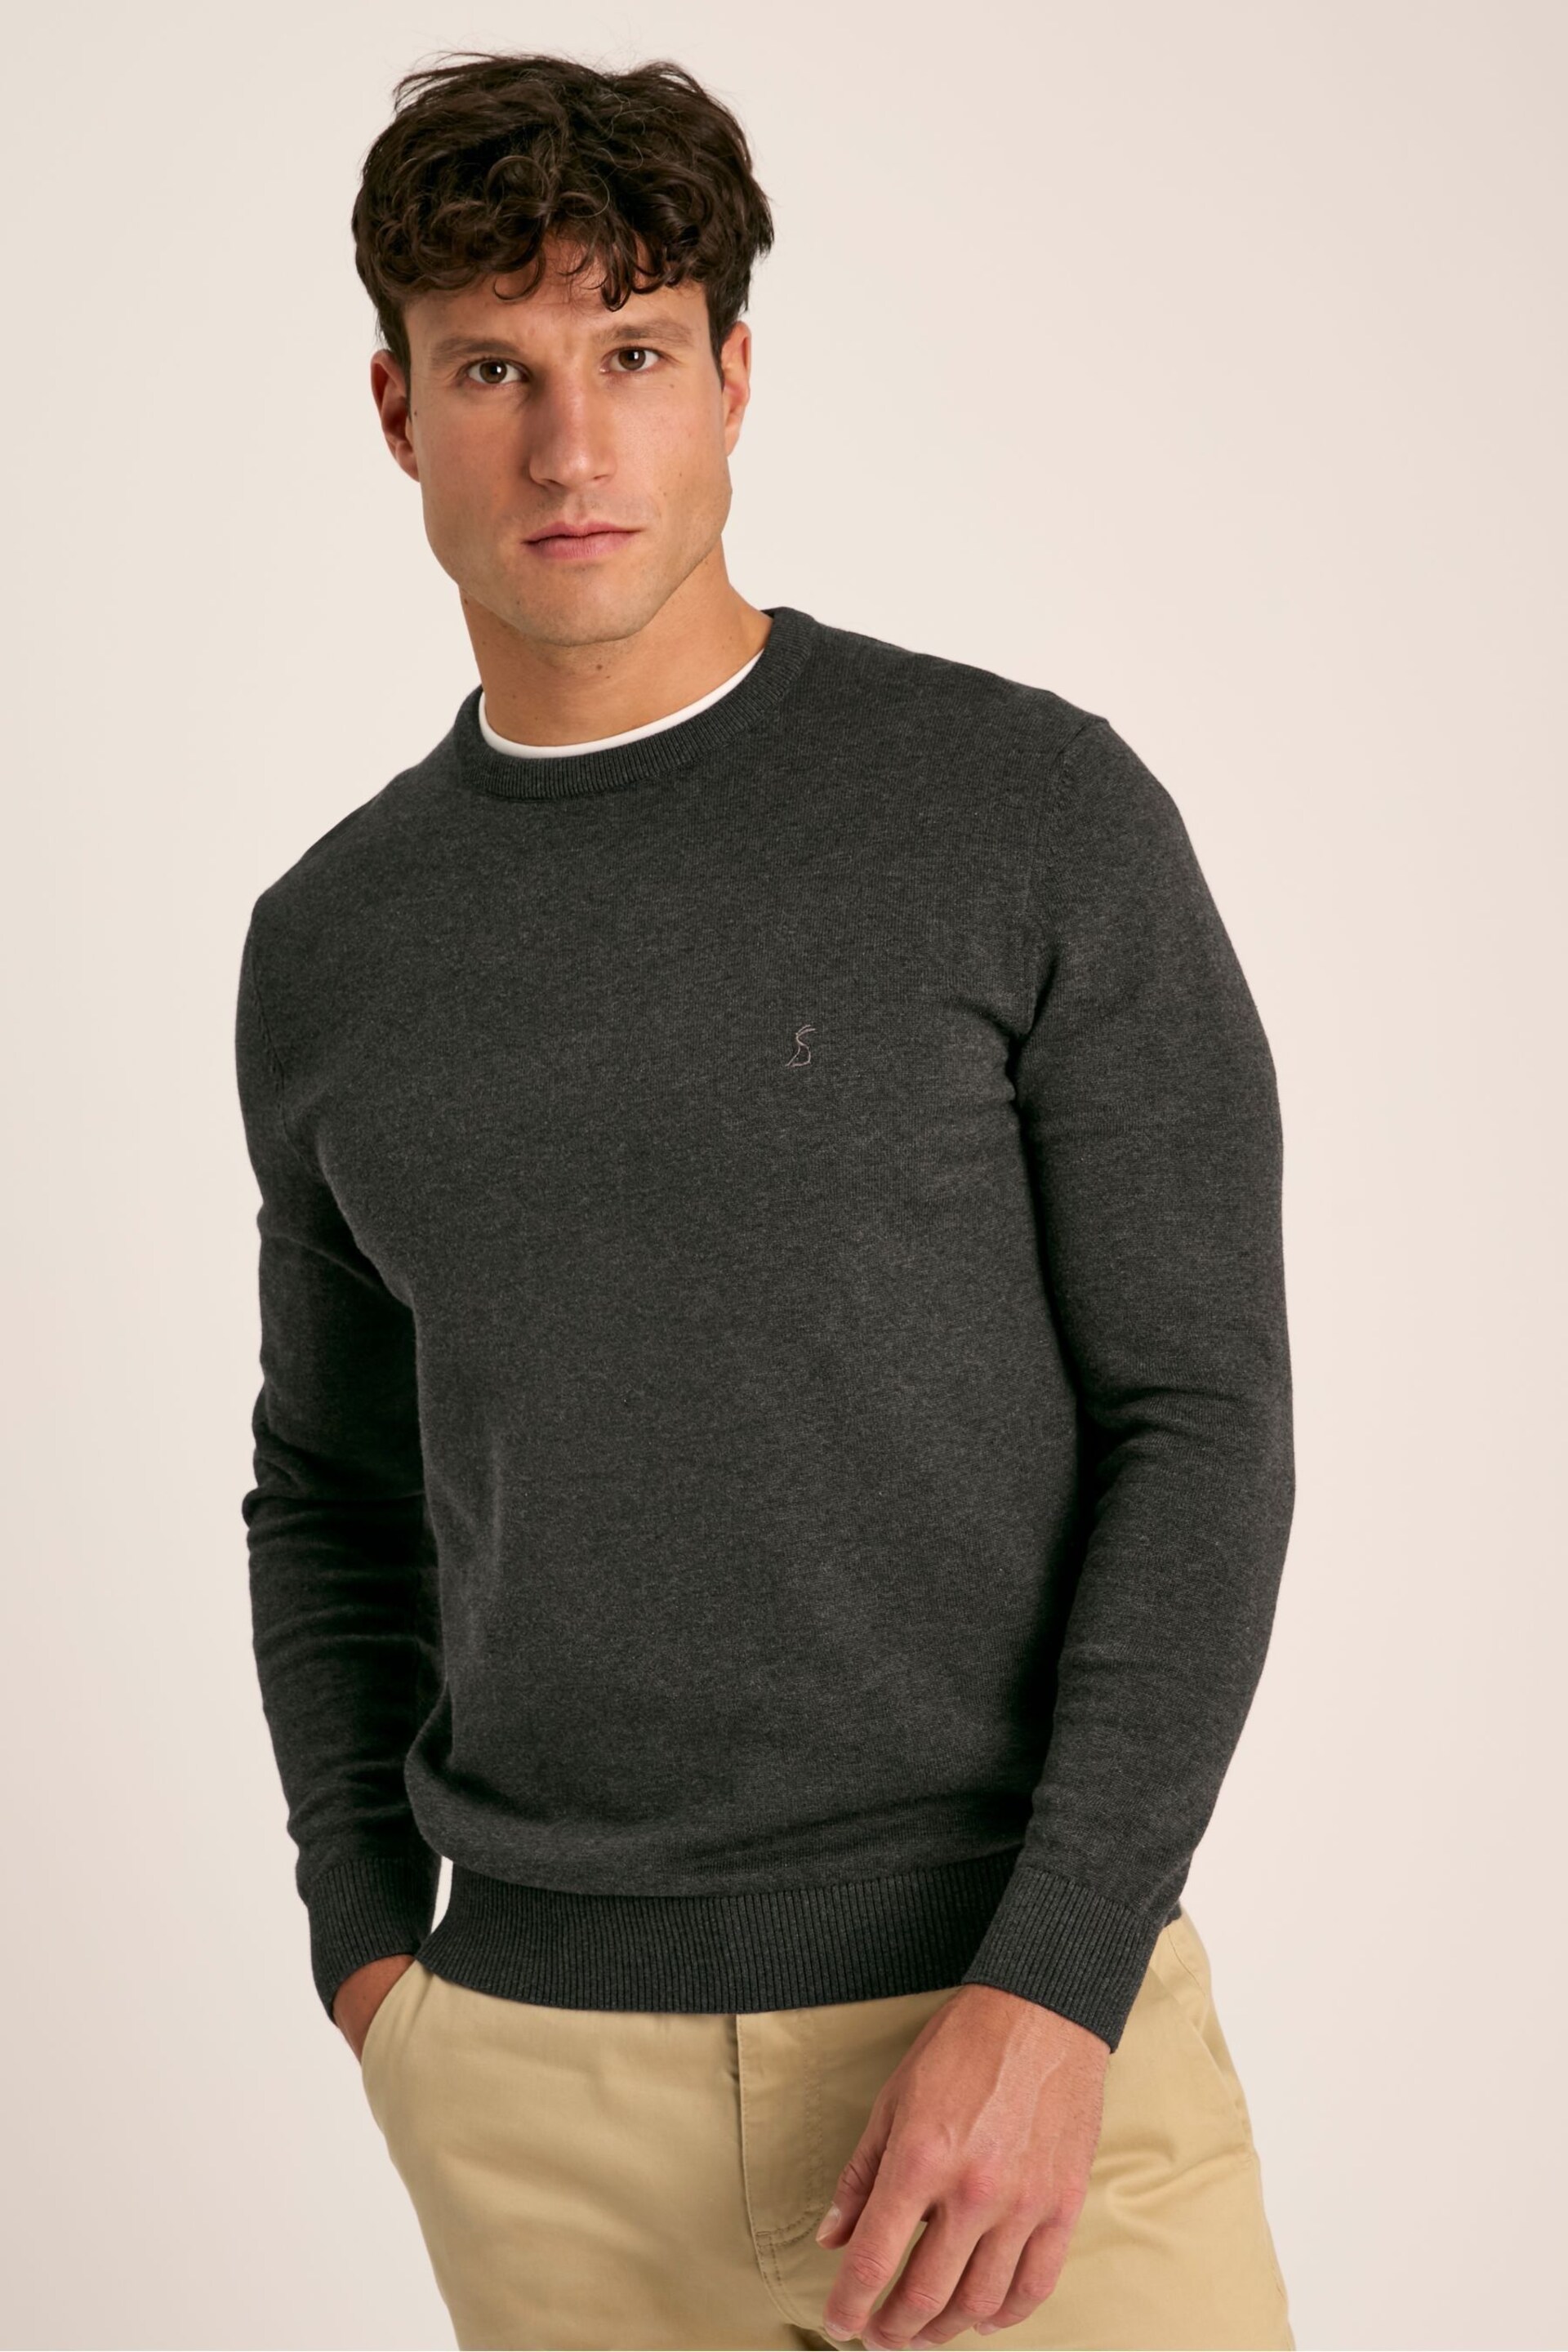 Joules Jarvis Grey Crew Neck Knitted Jumper - Image 1 of 7